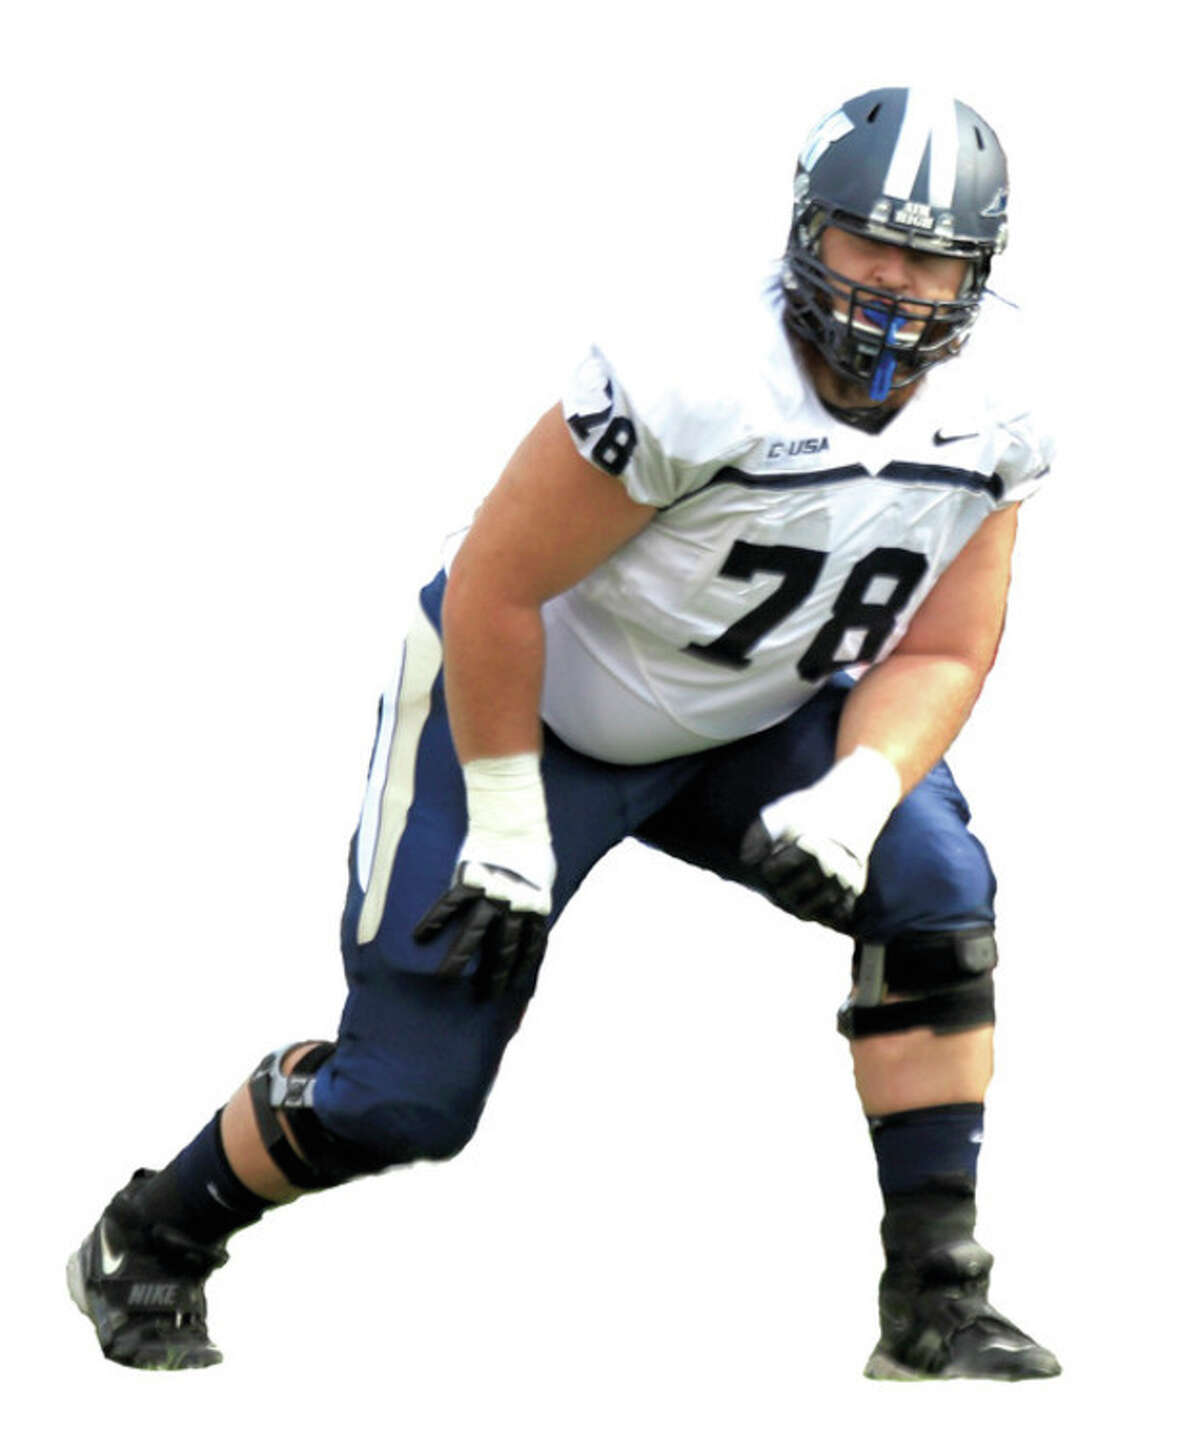 September 7, 2013; College Park, MD, USA; Old Dominion Monarchs offensive lineman D.J. Morrell (78) before the play against the Maryland Terrapins in the first half at Byrd Stadium in Capital One Field in College Park, MD. Mandatory Credit: Brian Schneider-www.ebrianschneider.com